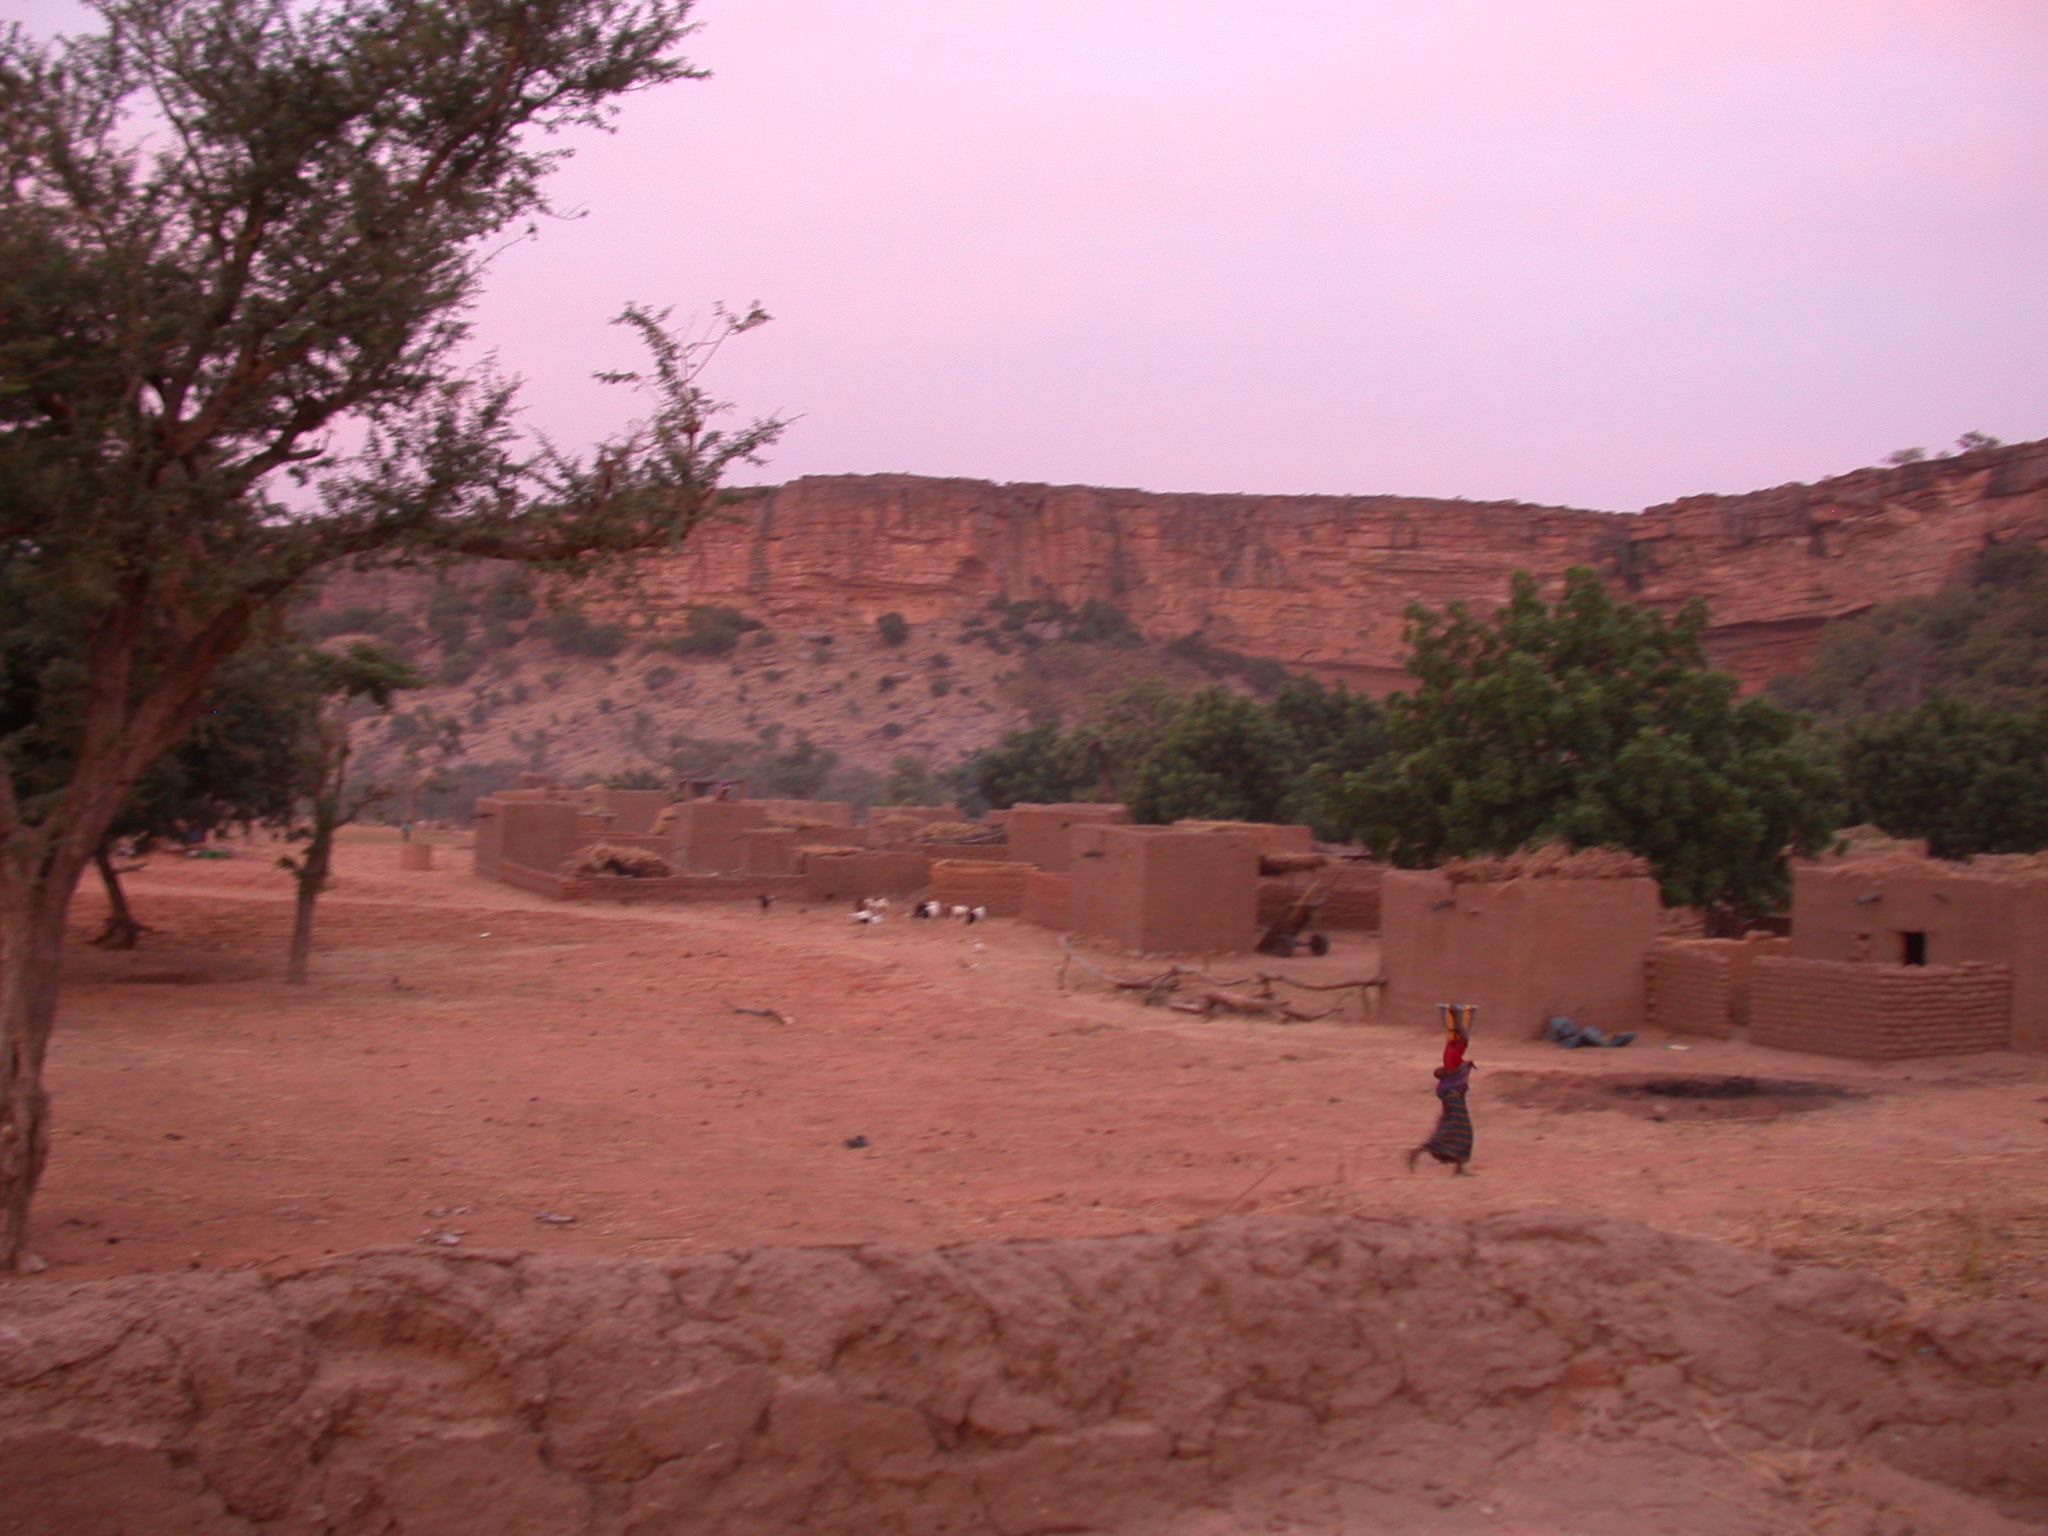 View of Falaise or Escarpment From Telli Village, Dogon Country, Mali